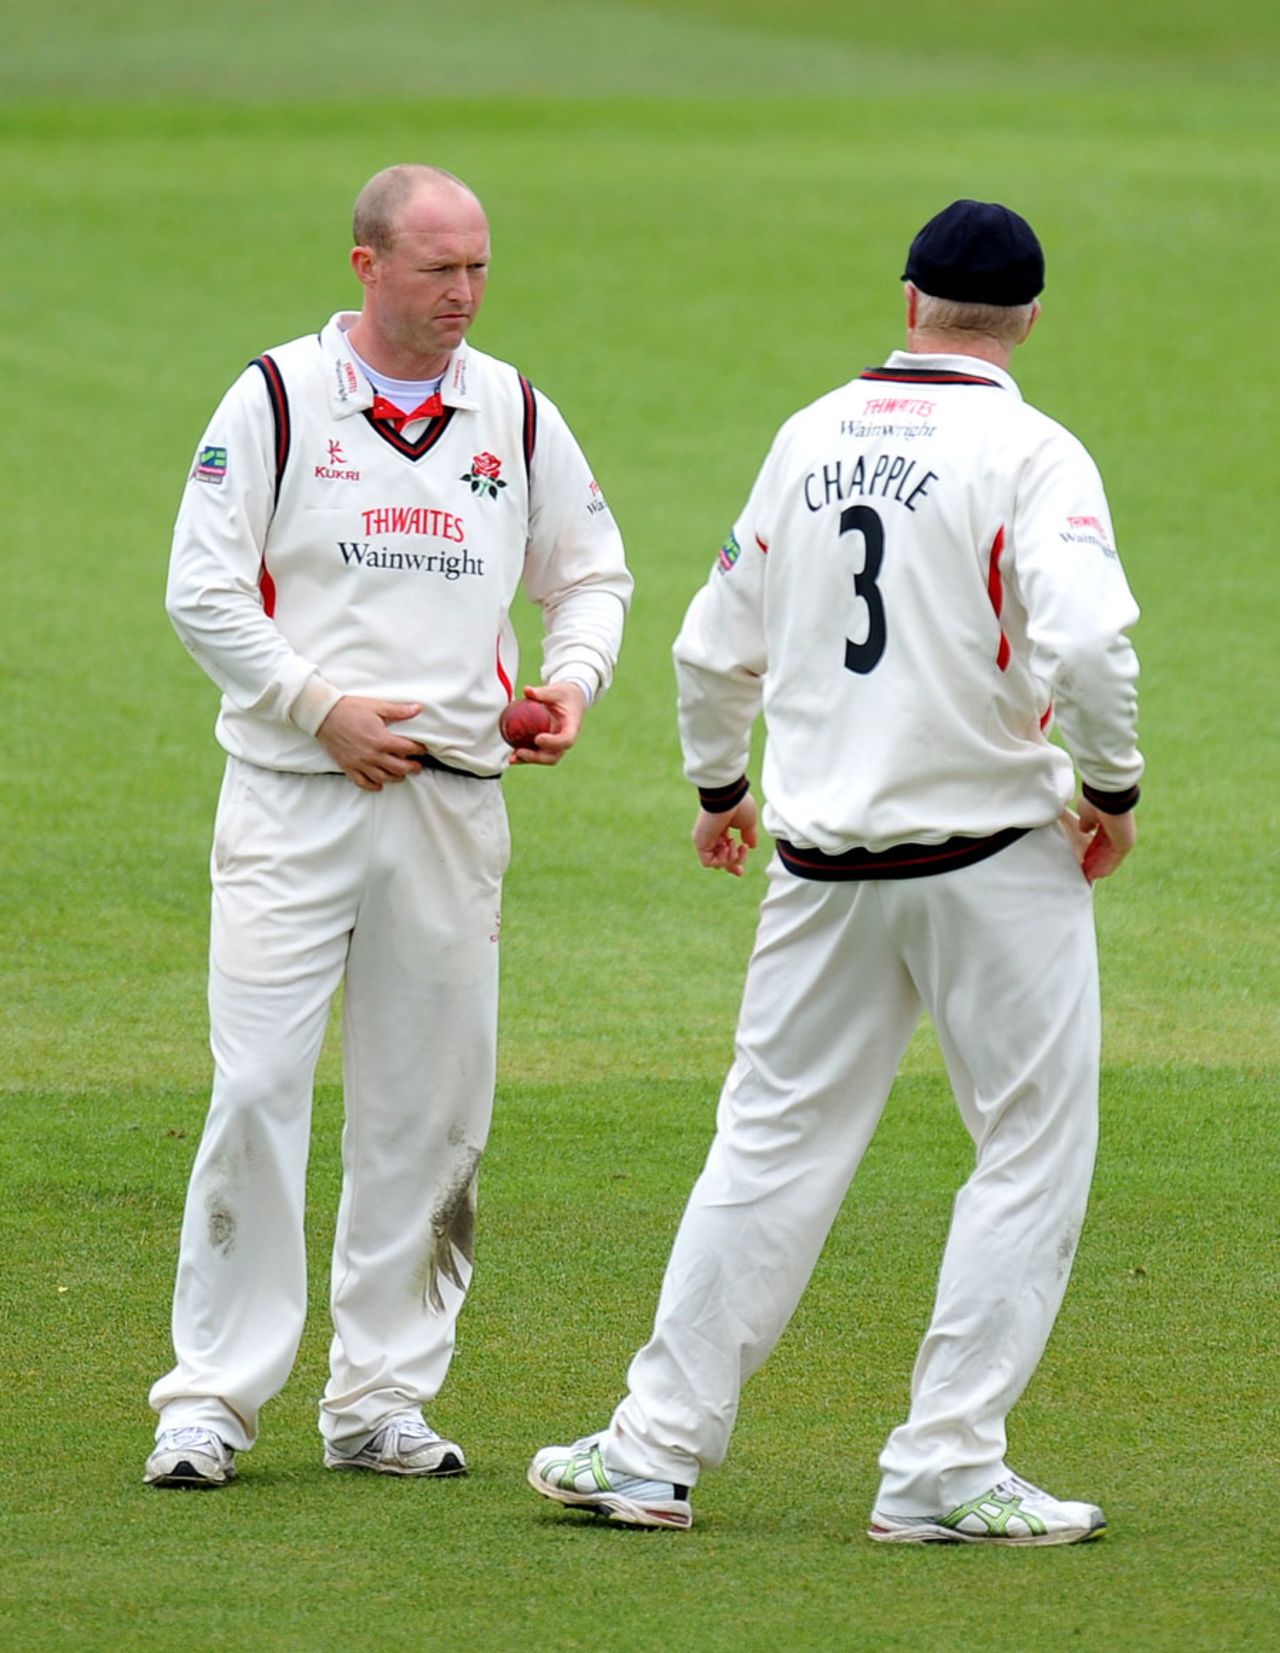 Gary Keedy discusses tactics with his captain, Glen Chapple, Warwickshire v Lancashire, County Championship, Division One, 2nd day, Edgbaston, May 17, 2012